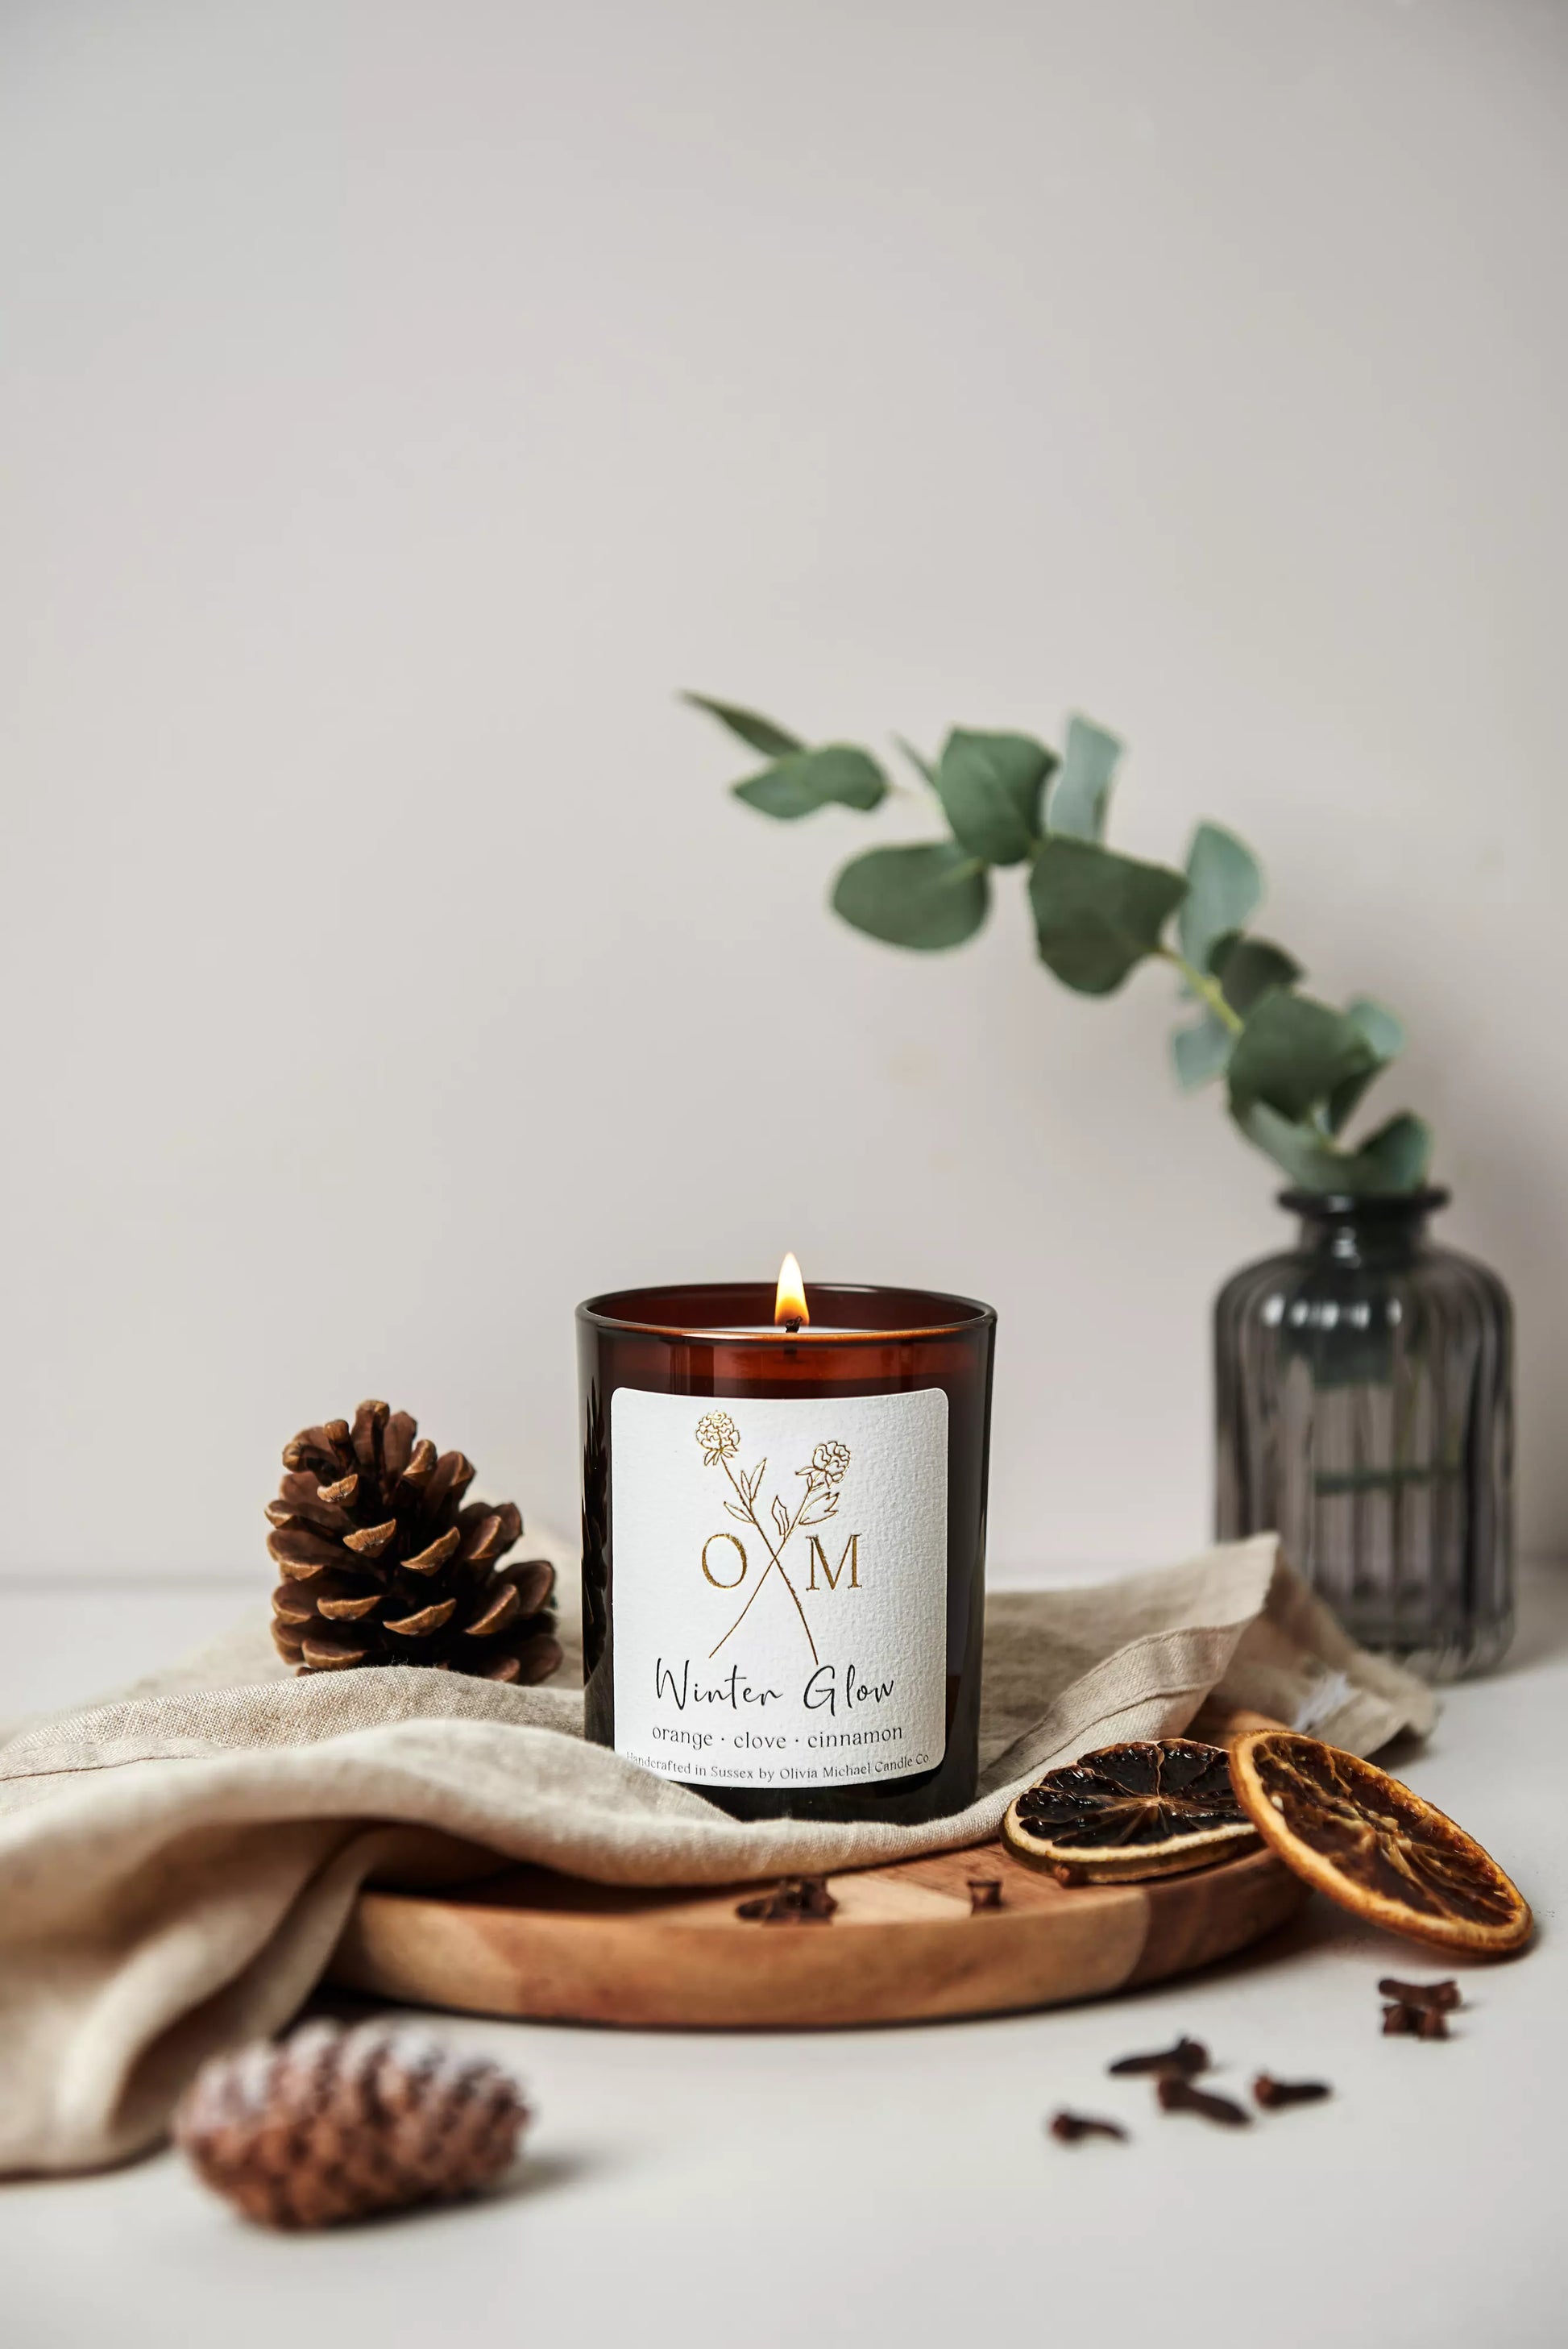 Our orange and clove scented candle is lit and on display in an amber glass jar.